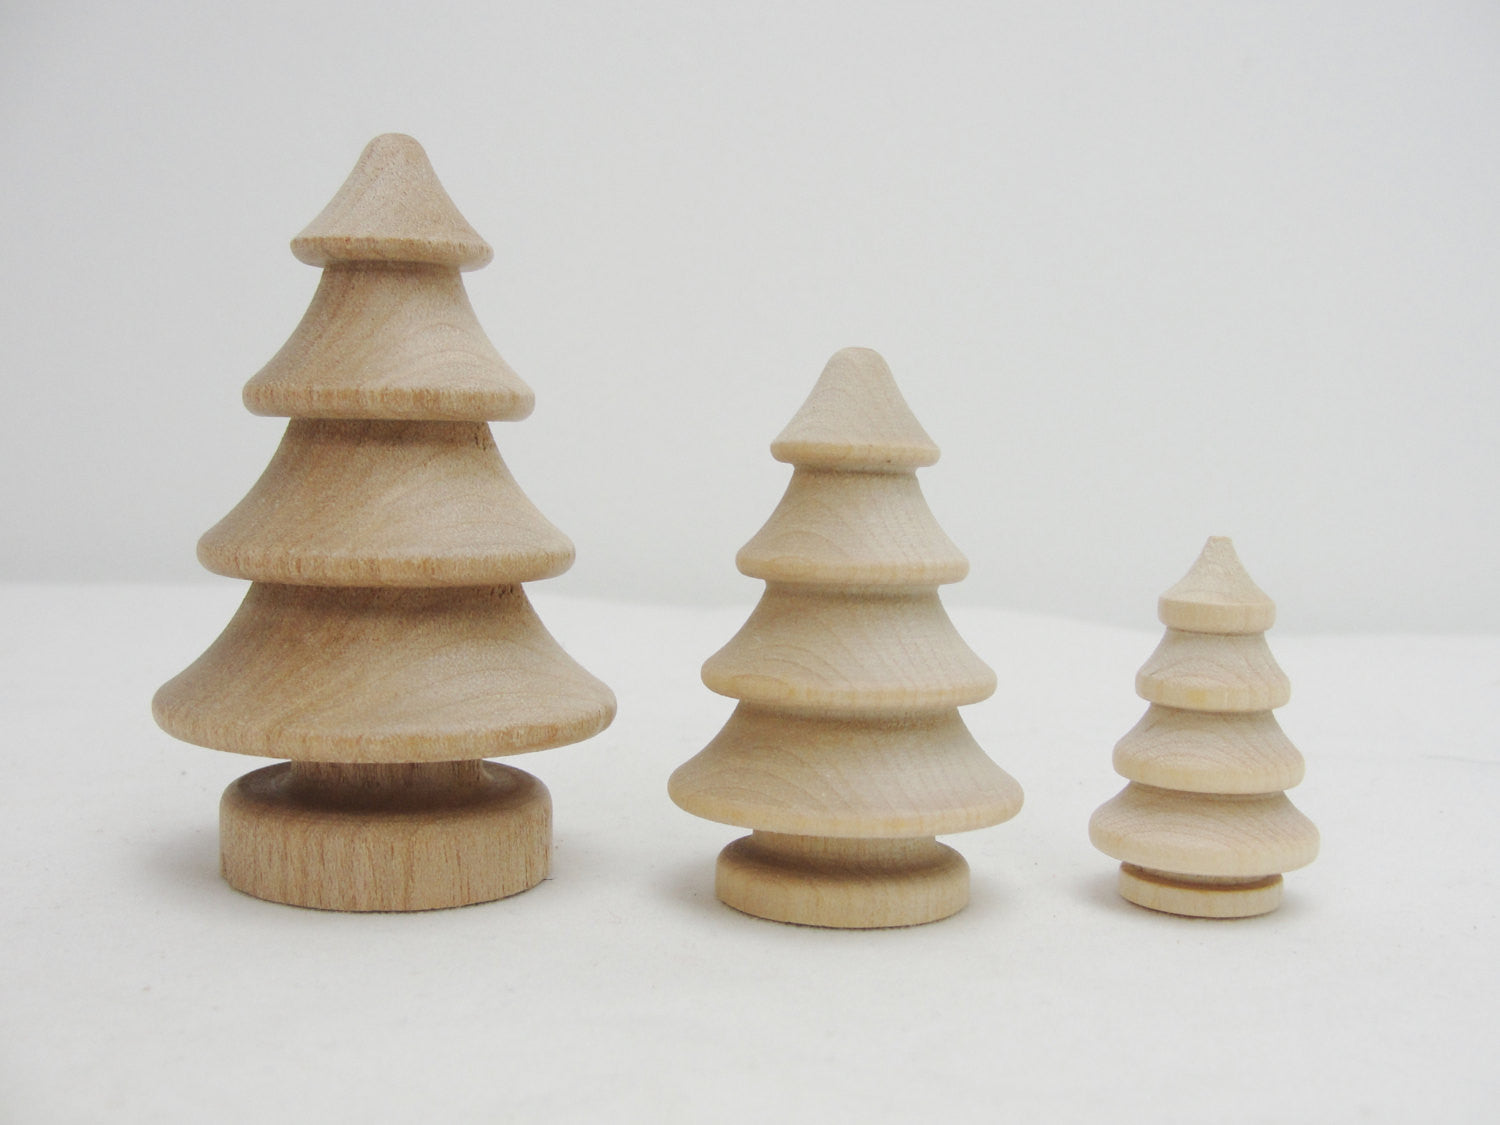 Wooden 3 dimensional turned trees 2 each of 3 sizes - Wood parts - Craft Supply House